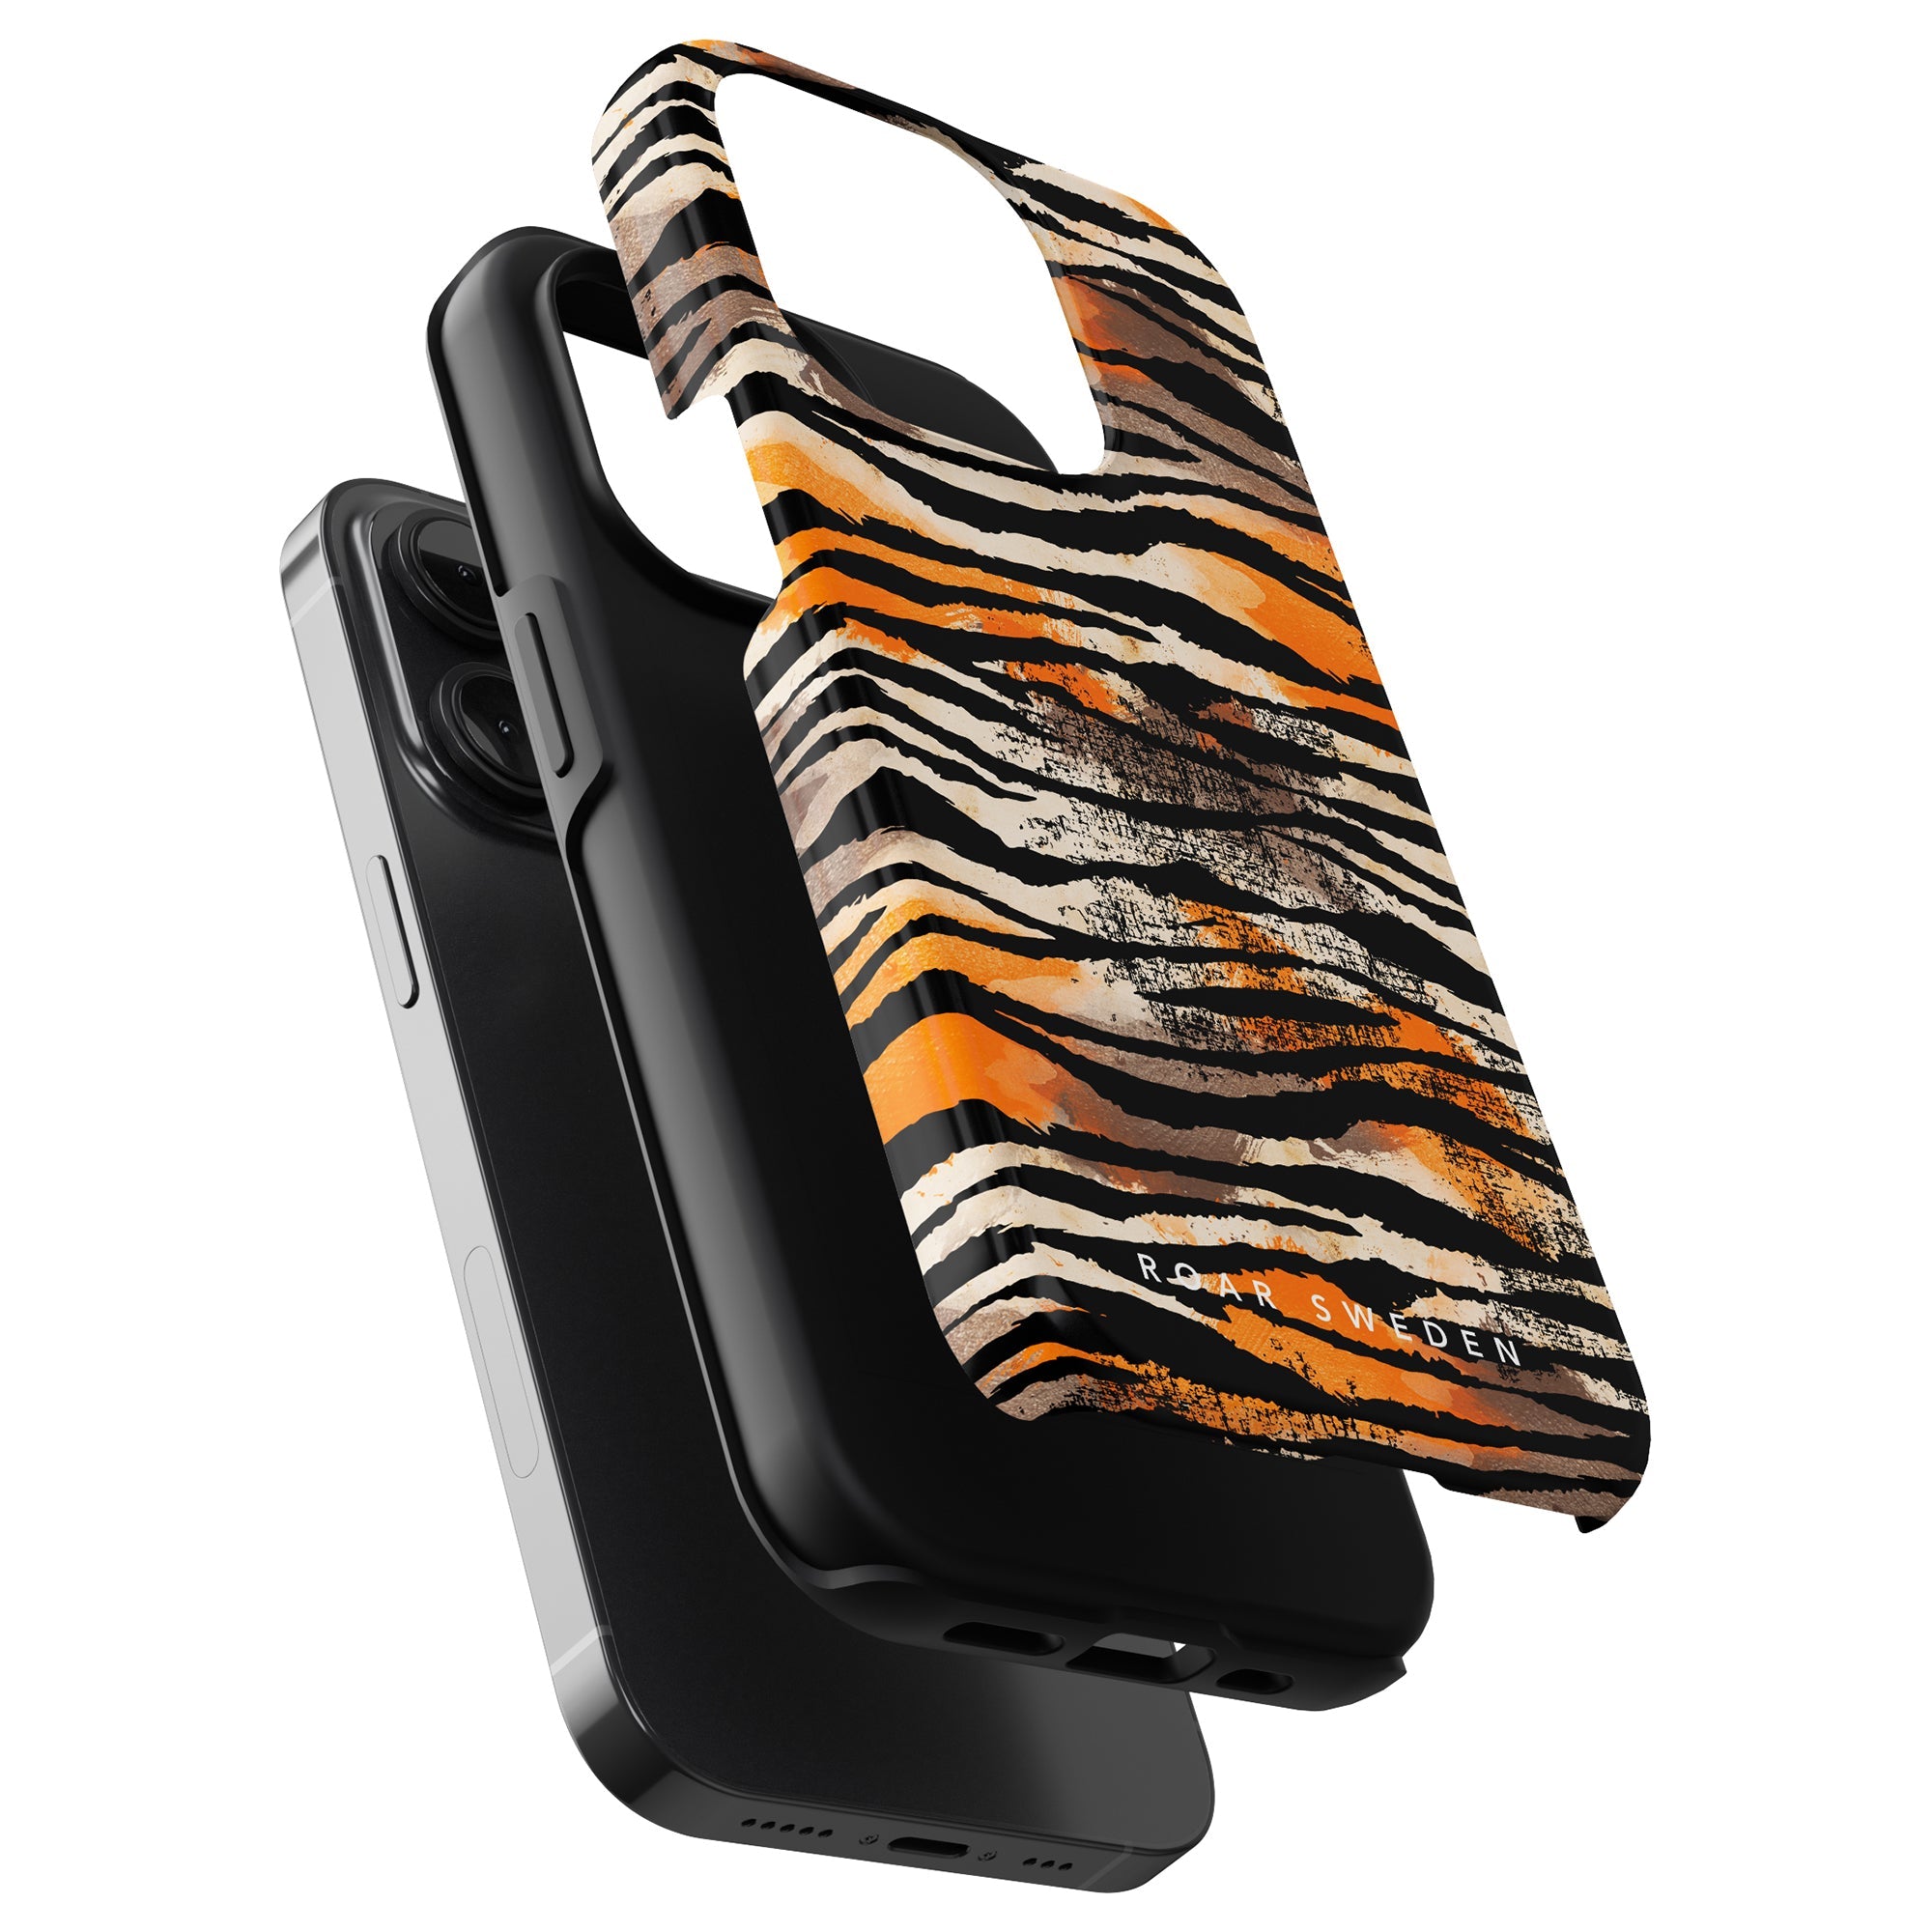 Elevate your iPhone 11 with a fierce Sun Tiger - Tough case, showcasing your stylish personality.